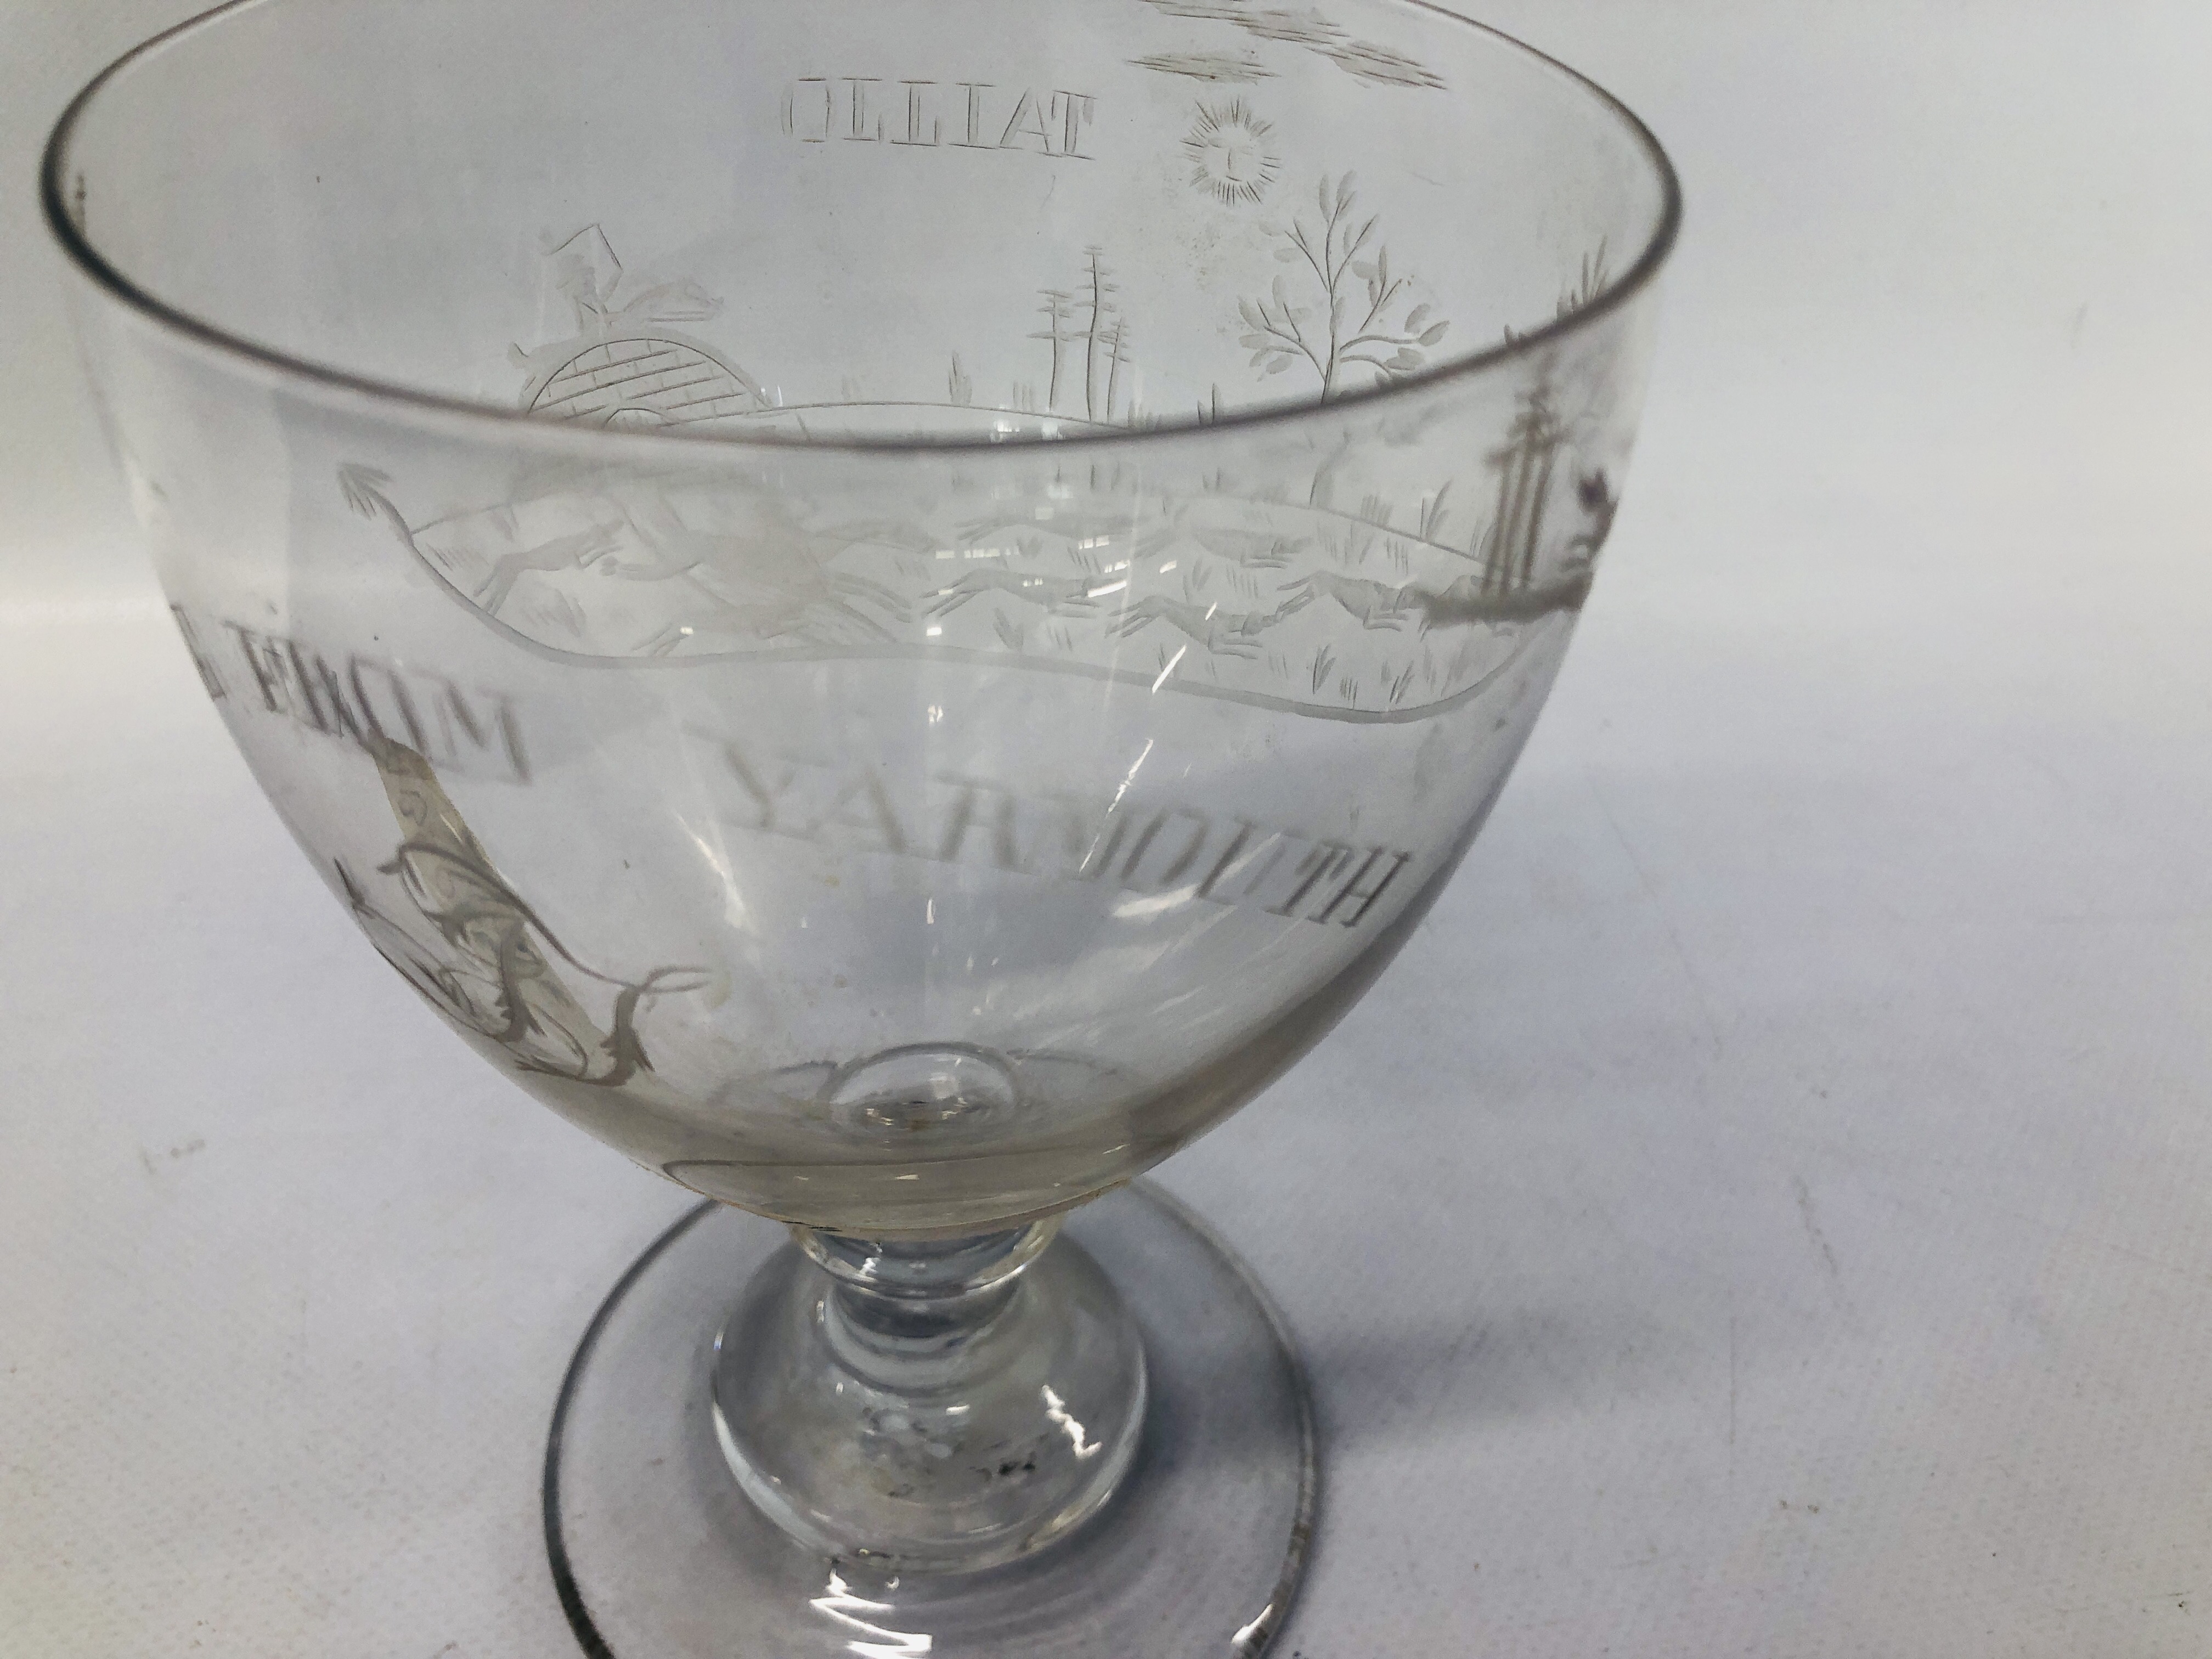 A RUMNER ENGRAVED BY JOHN ABSALON OF GREAT YARMOUTH - ENGRAVED A "TRIFLE FROM YARMOUTH TALLIO" WITH - Image 6 of 8